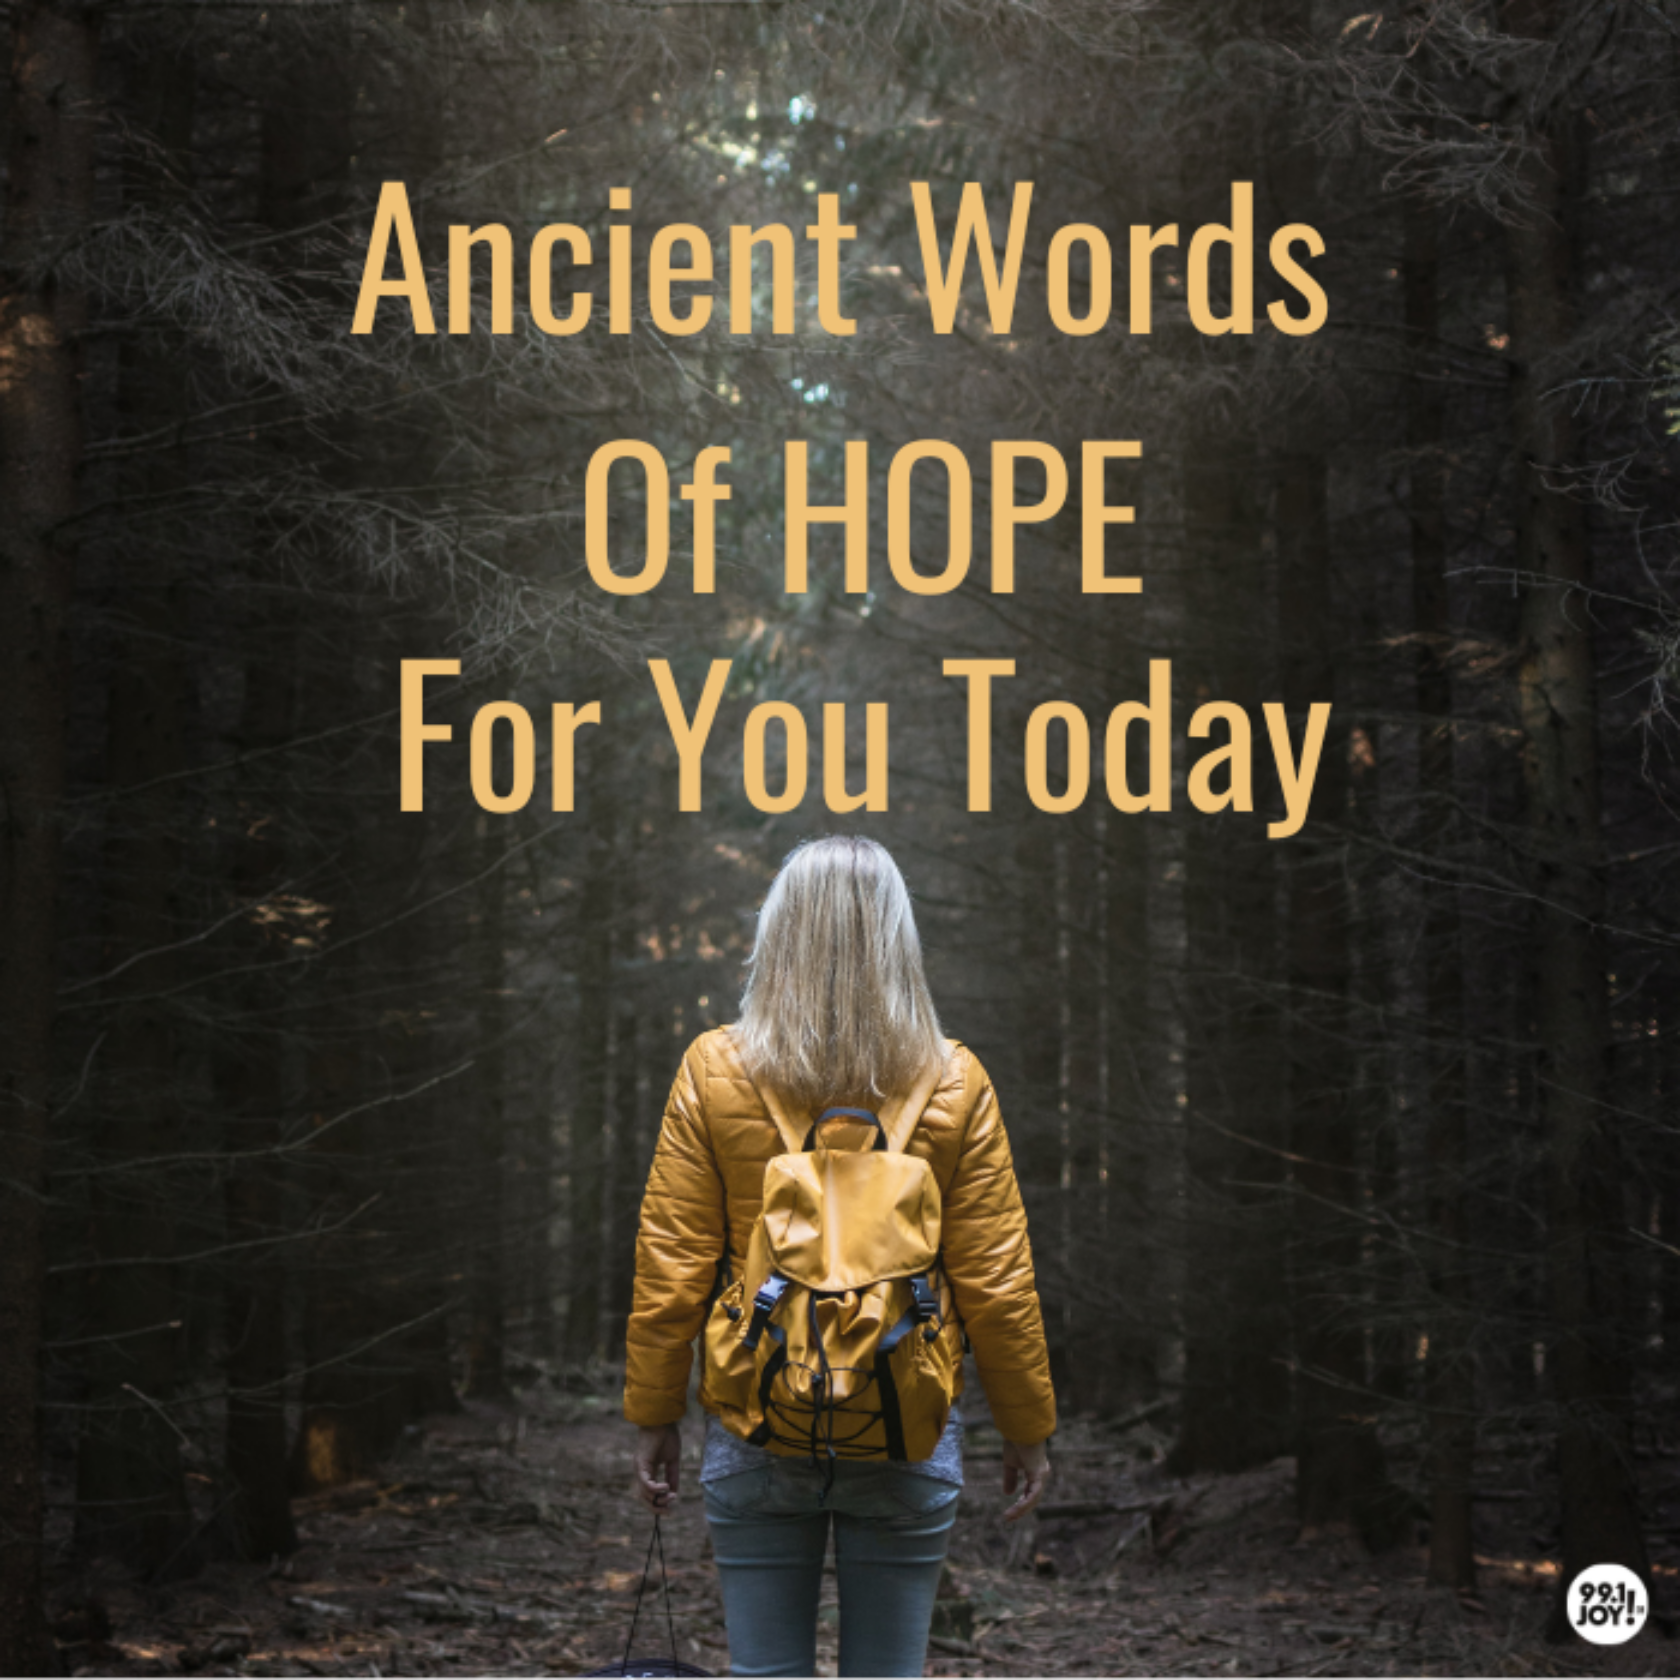 Ancient Words Of HOPE For You Today